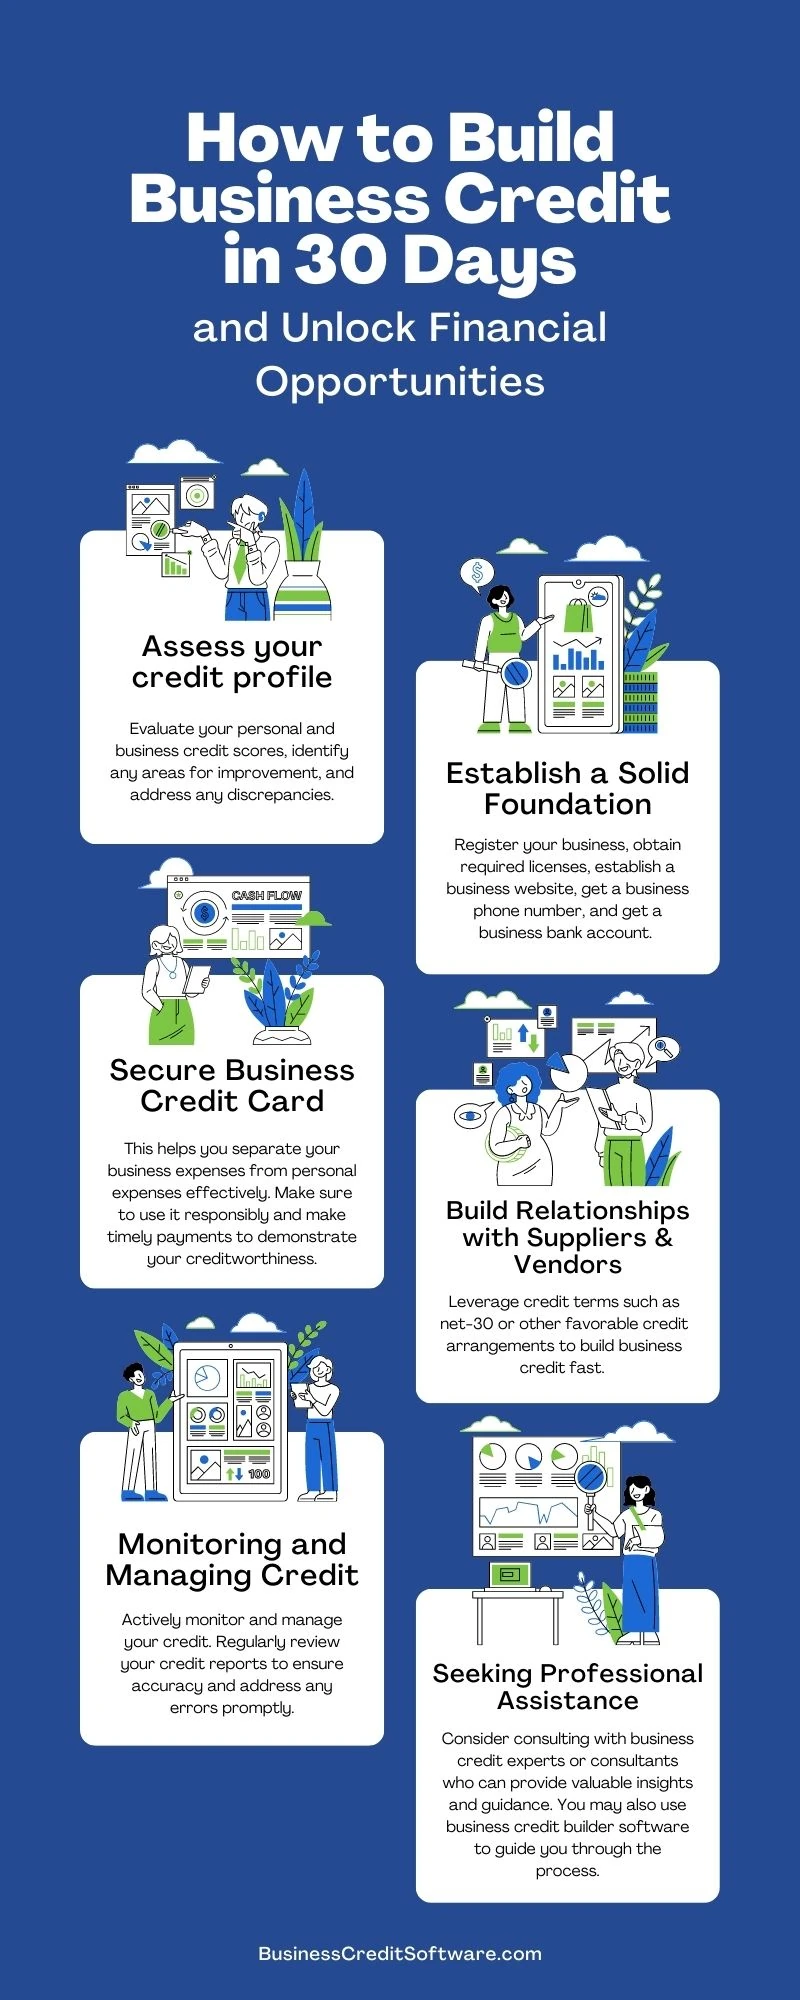 How to Build Business Credit in 30 Days Infographic